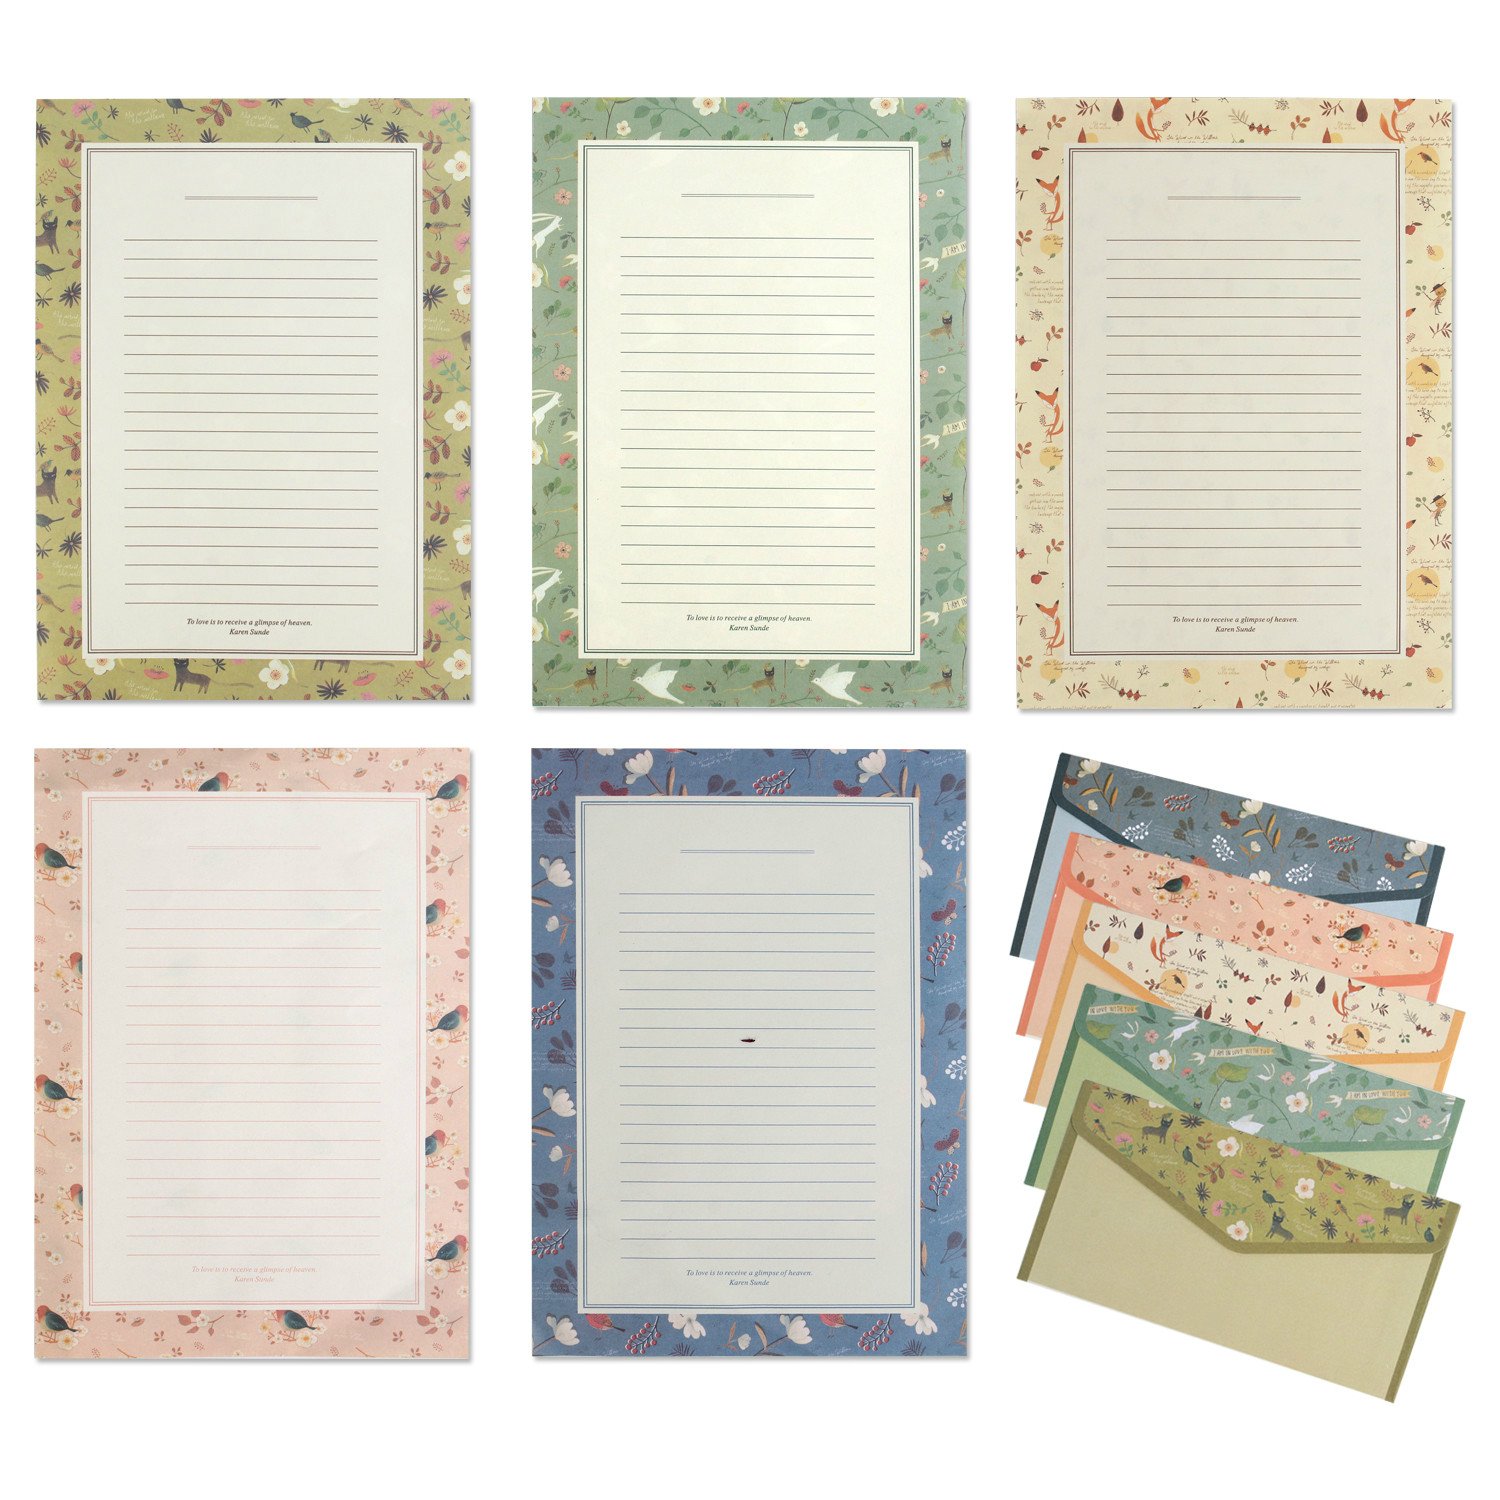 IMagicoo 48 Cute Lovely Writing Stationery Paper Letter Set with 24 Envelope / Envelope Seal Sticker (3)